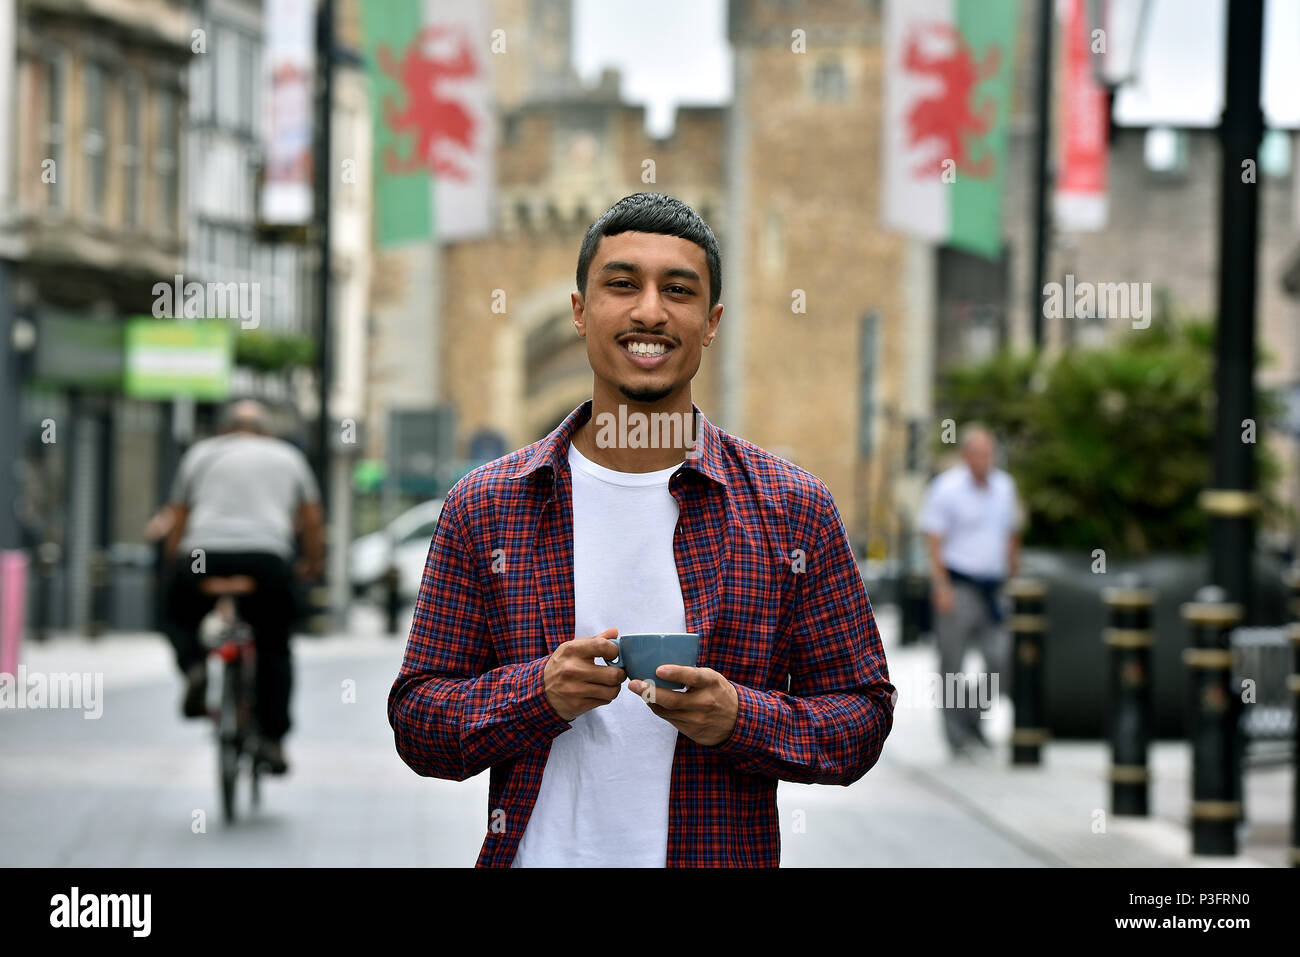 Pictures show Ibby Tarafdar, aged 27 years of Gabalfa, Cardiff. Ibby a graphic designer has been commissioned by Jay Z , but still works at Starbucks Stock Photo